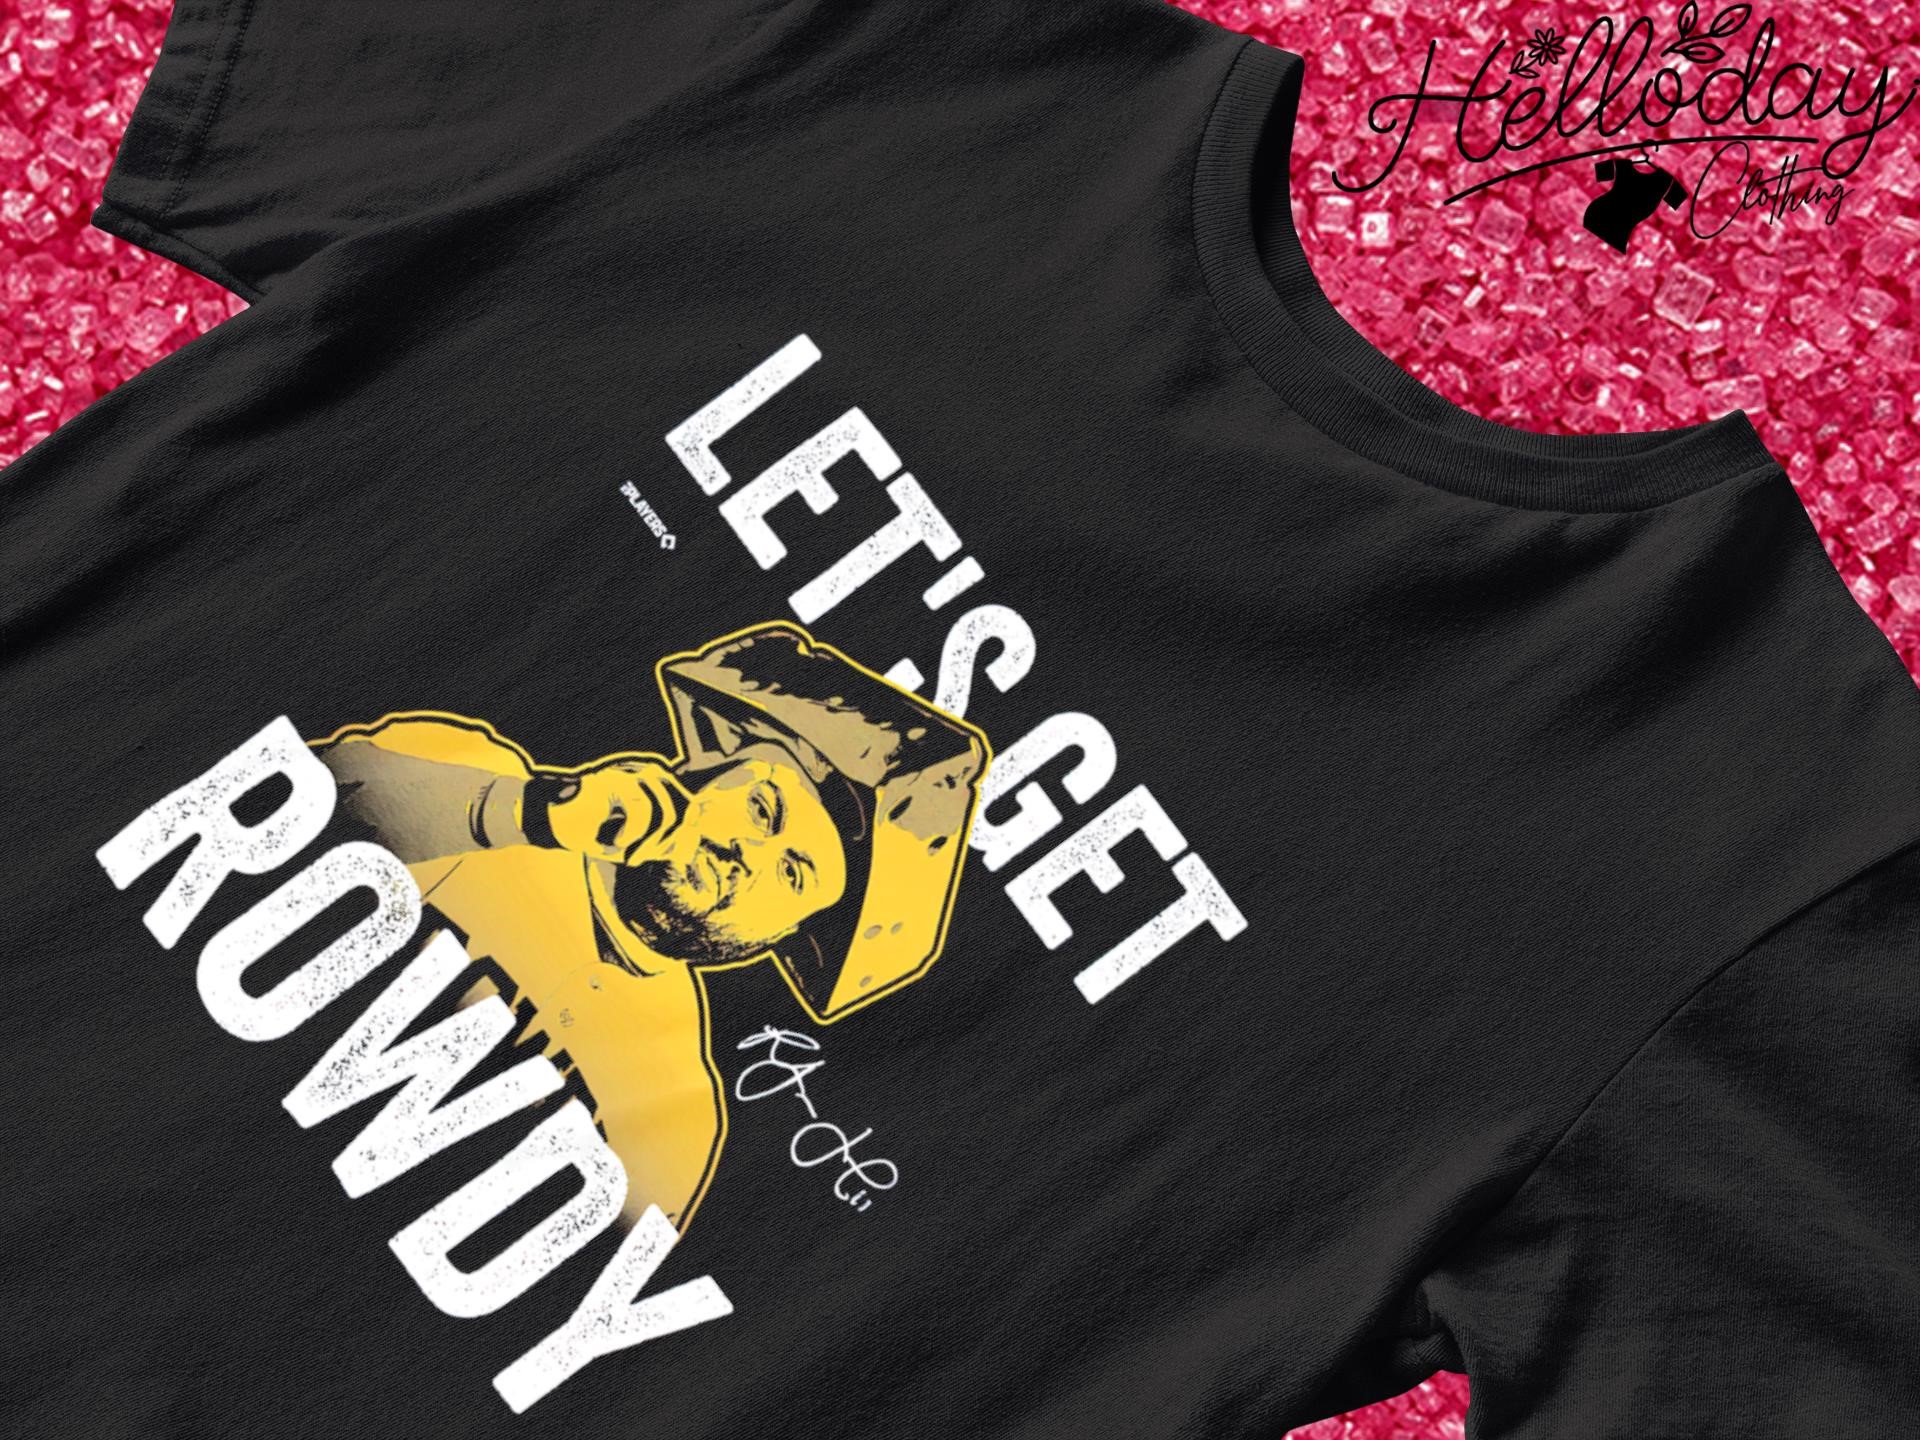 Rowdy Tellez Let's Get Rowdy shirt, hoodie, sweater, long sleeve and tank  top